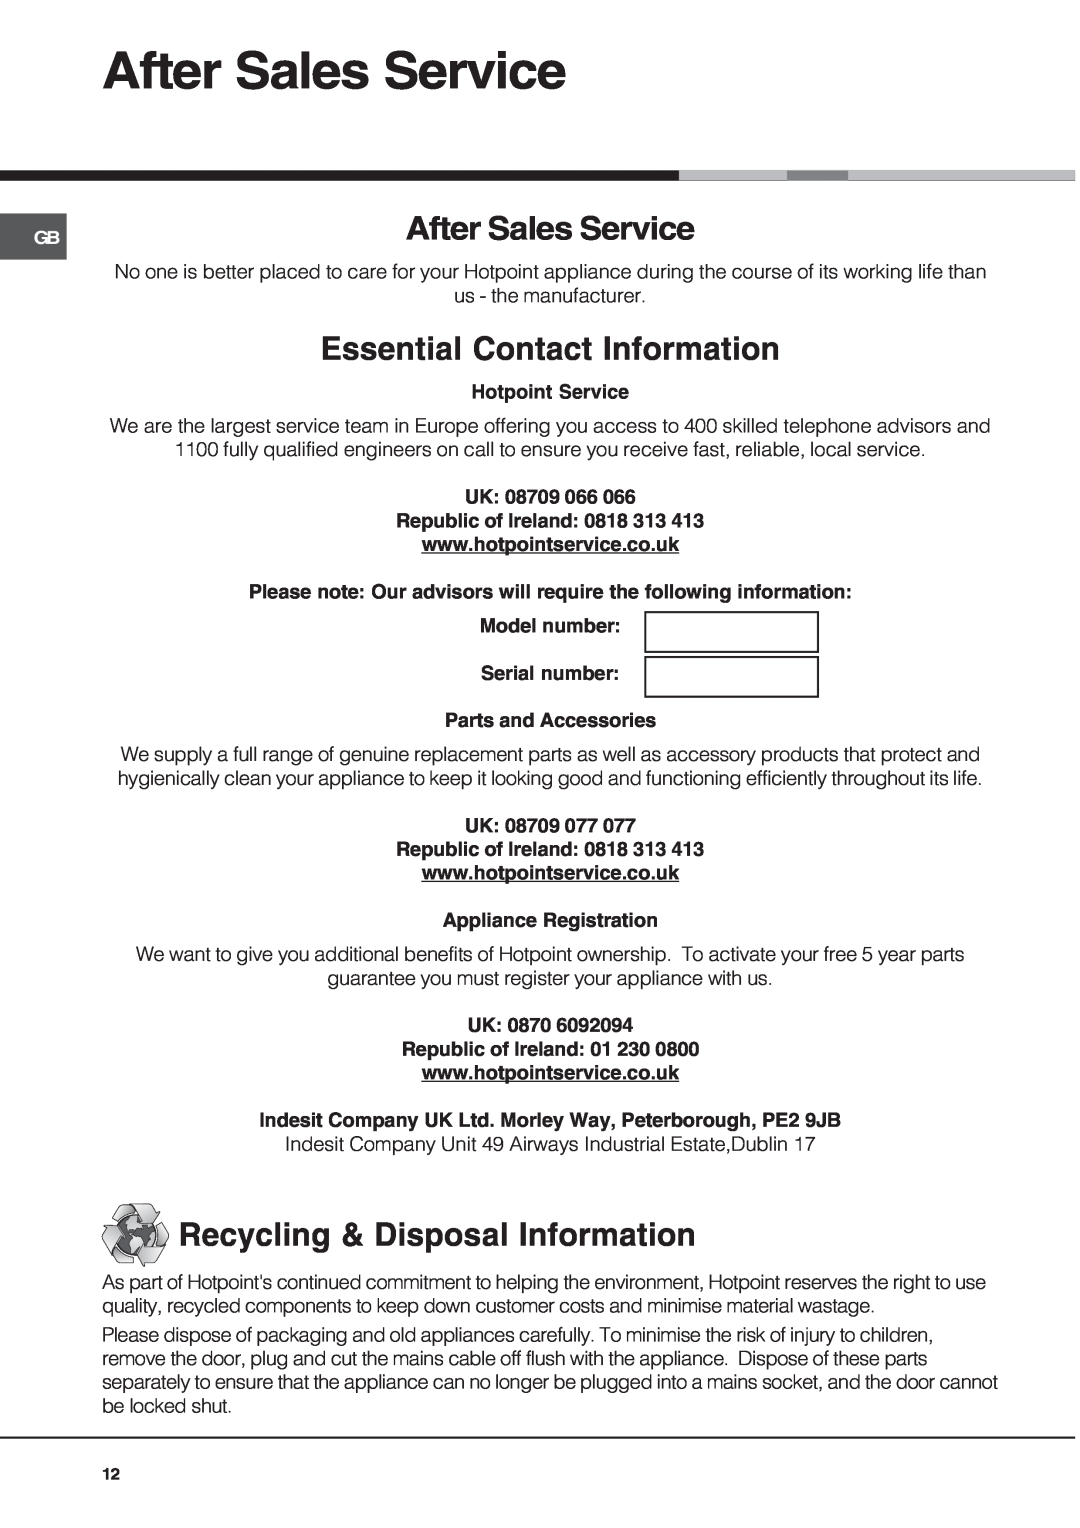 Hotpoint SQ892I manual After Sales Service, Essential Contact Information, Recycling & Disposal Information 